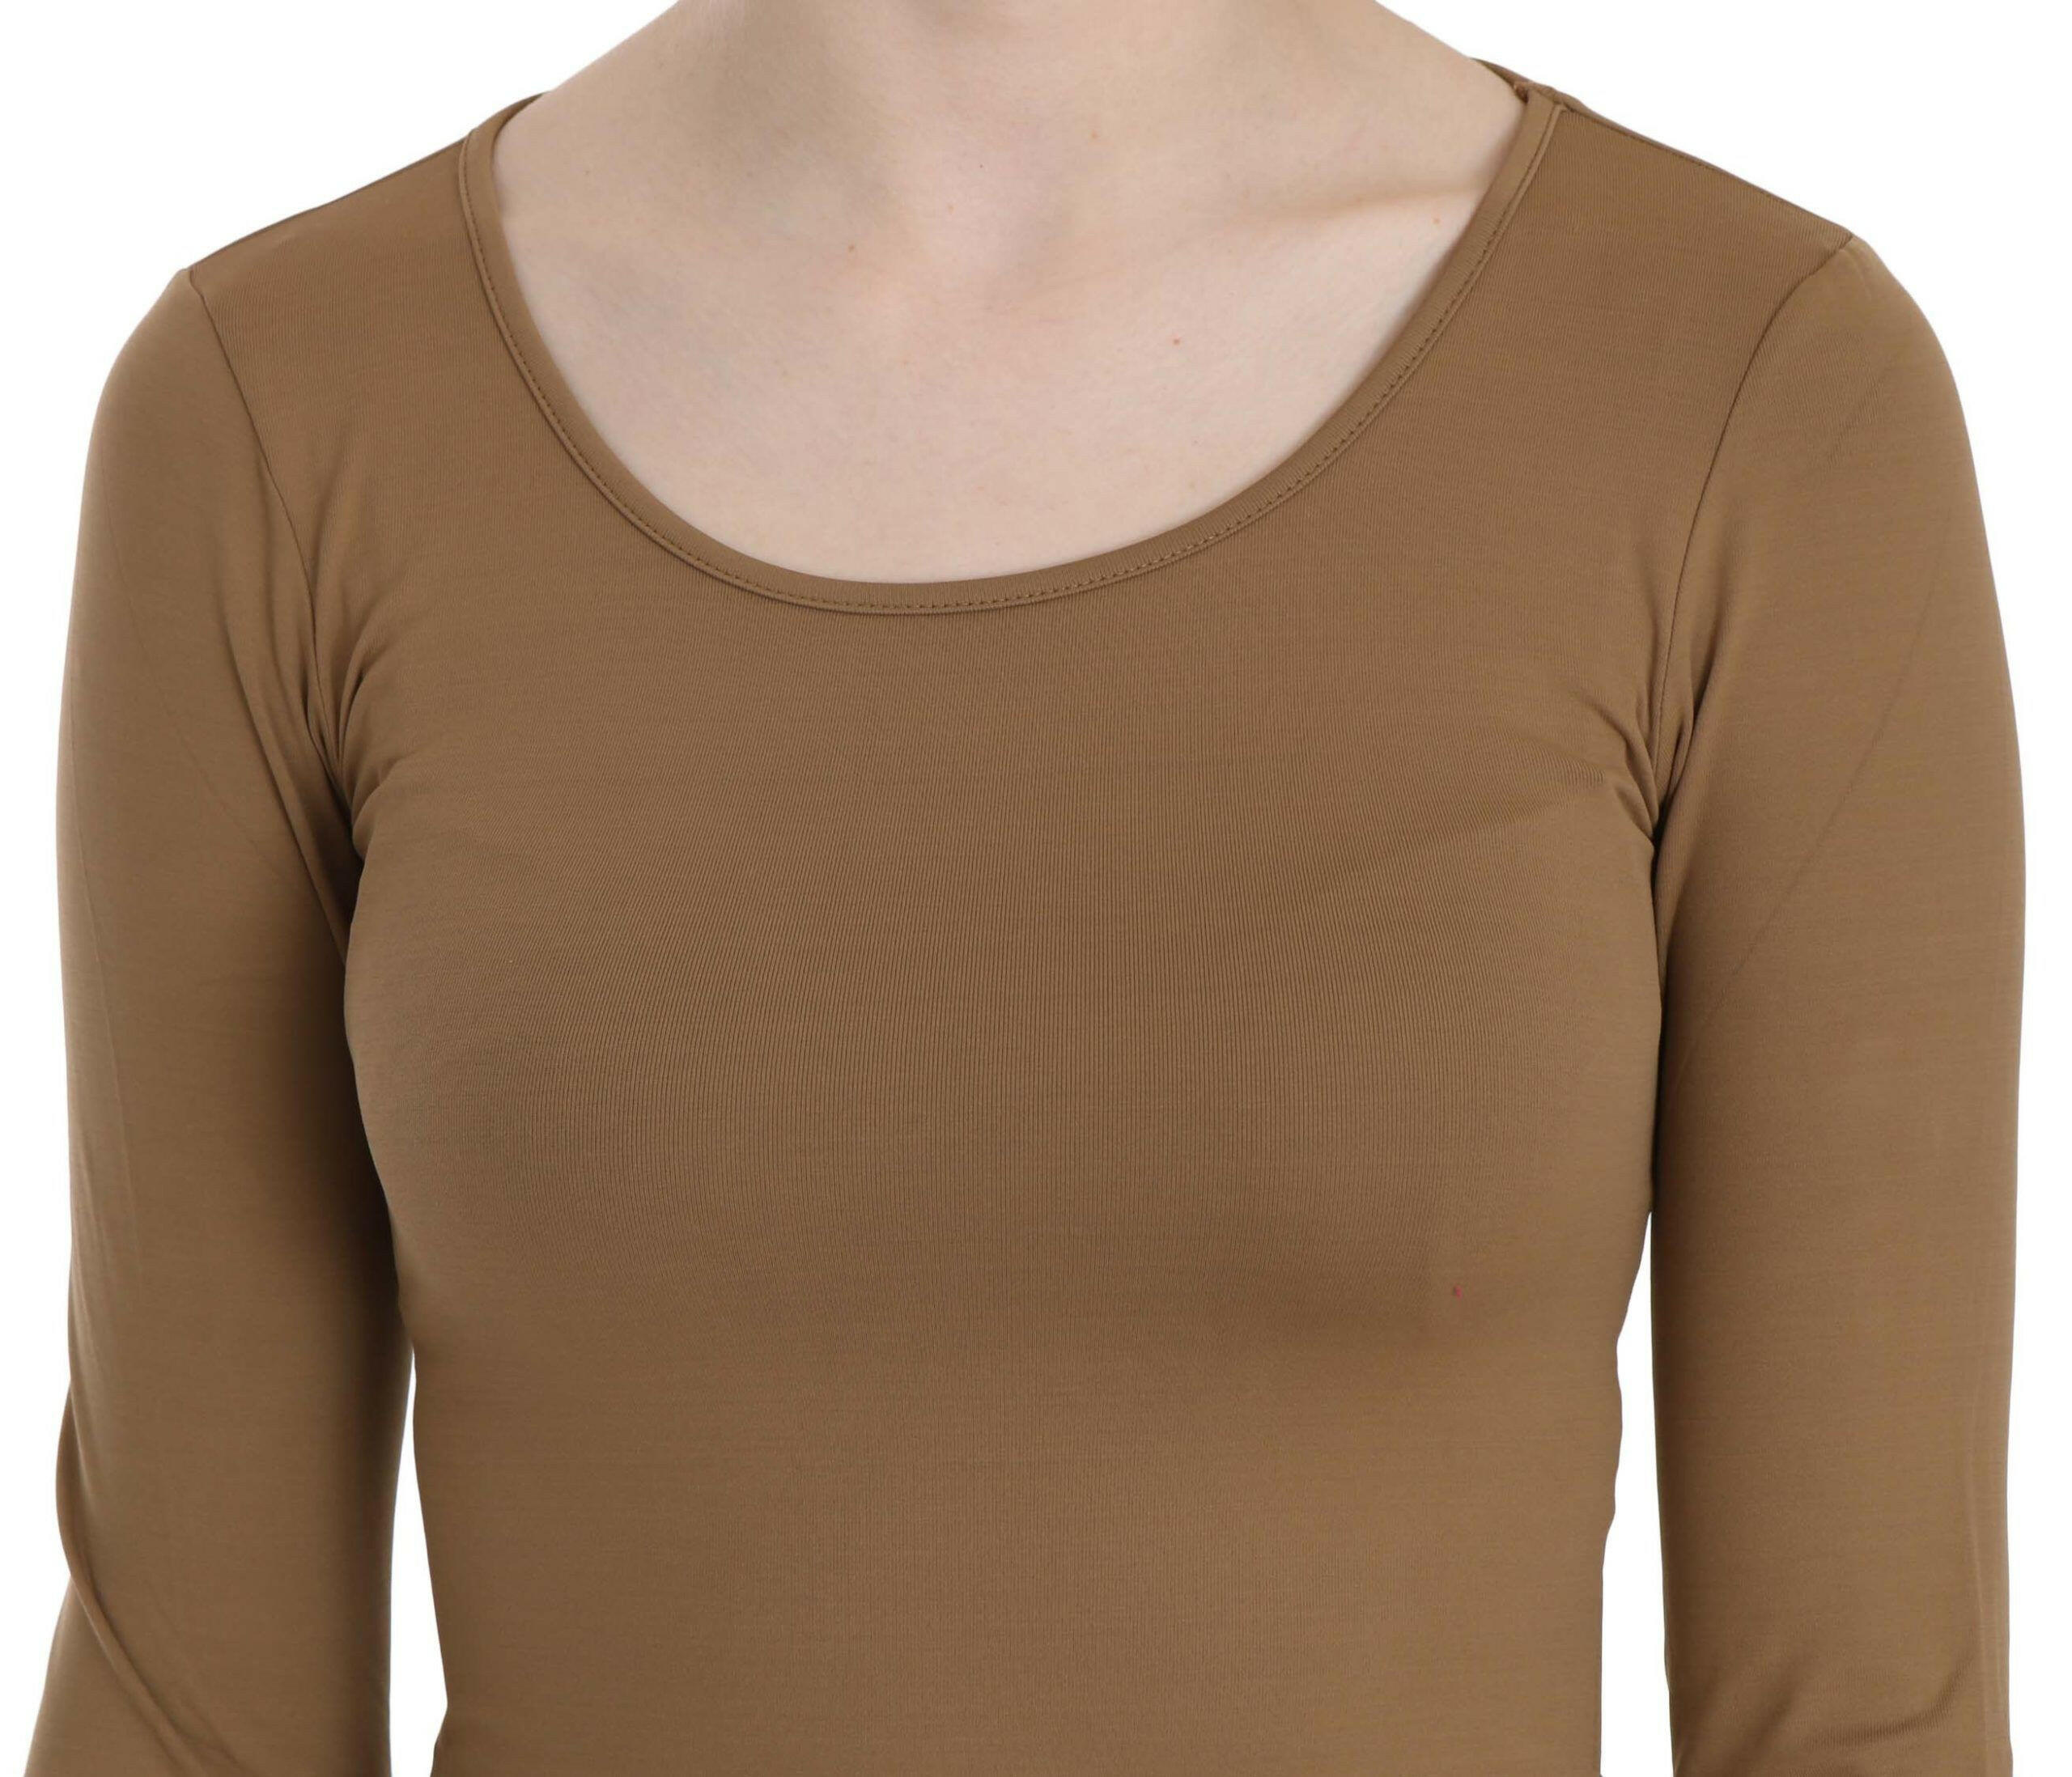 GF Ferre Brown Long Round Neck Sleeve Fitted Shirt Tops Blouse - GENUINE AUTHENTIC BRAND LLC  